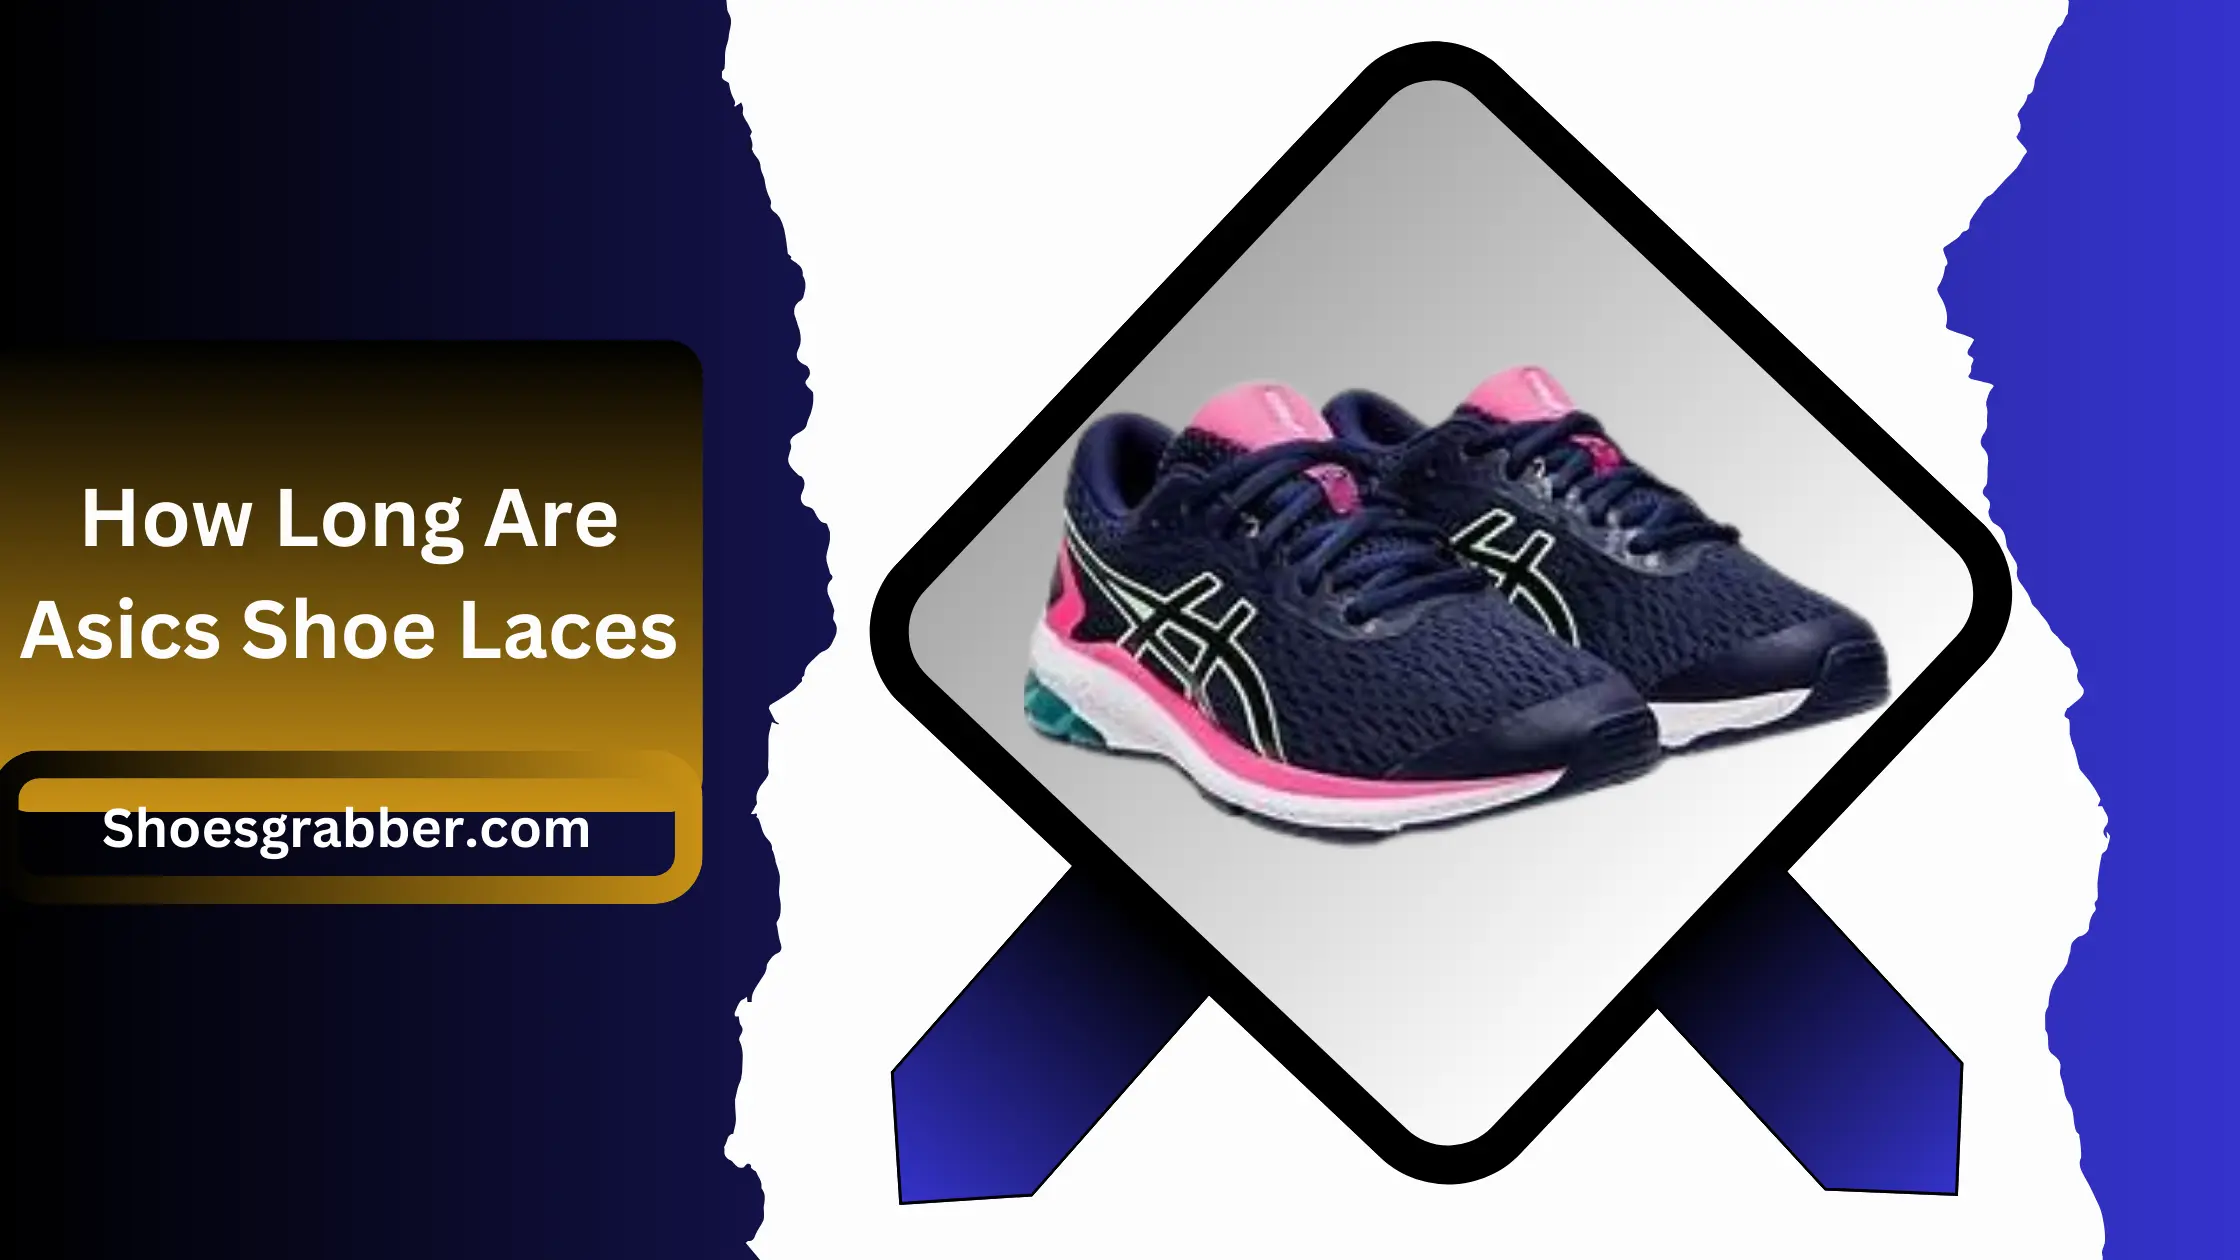 How Long Are Asics Shoe Laces - A Guide